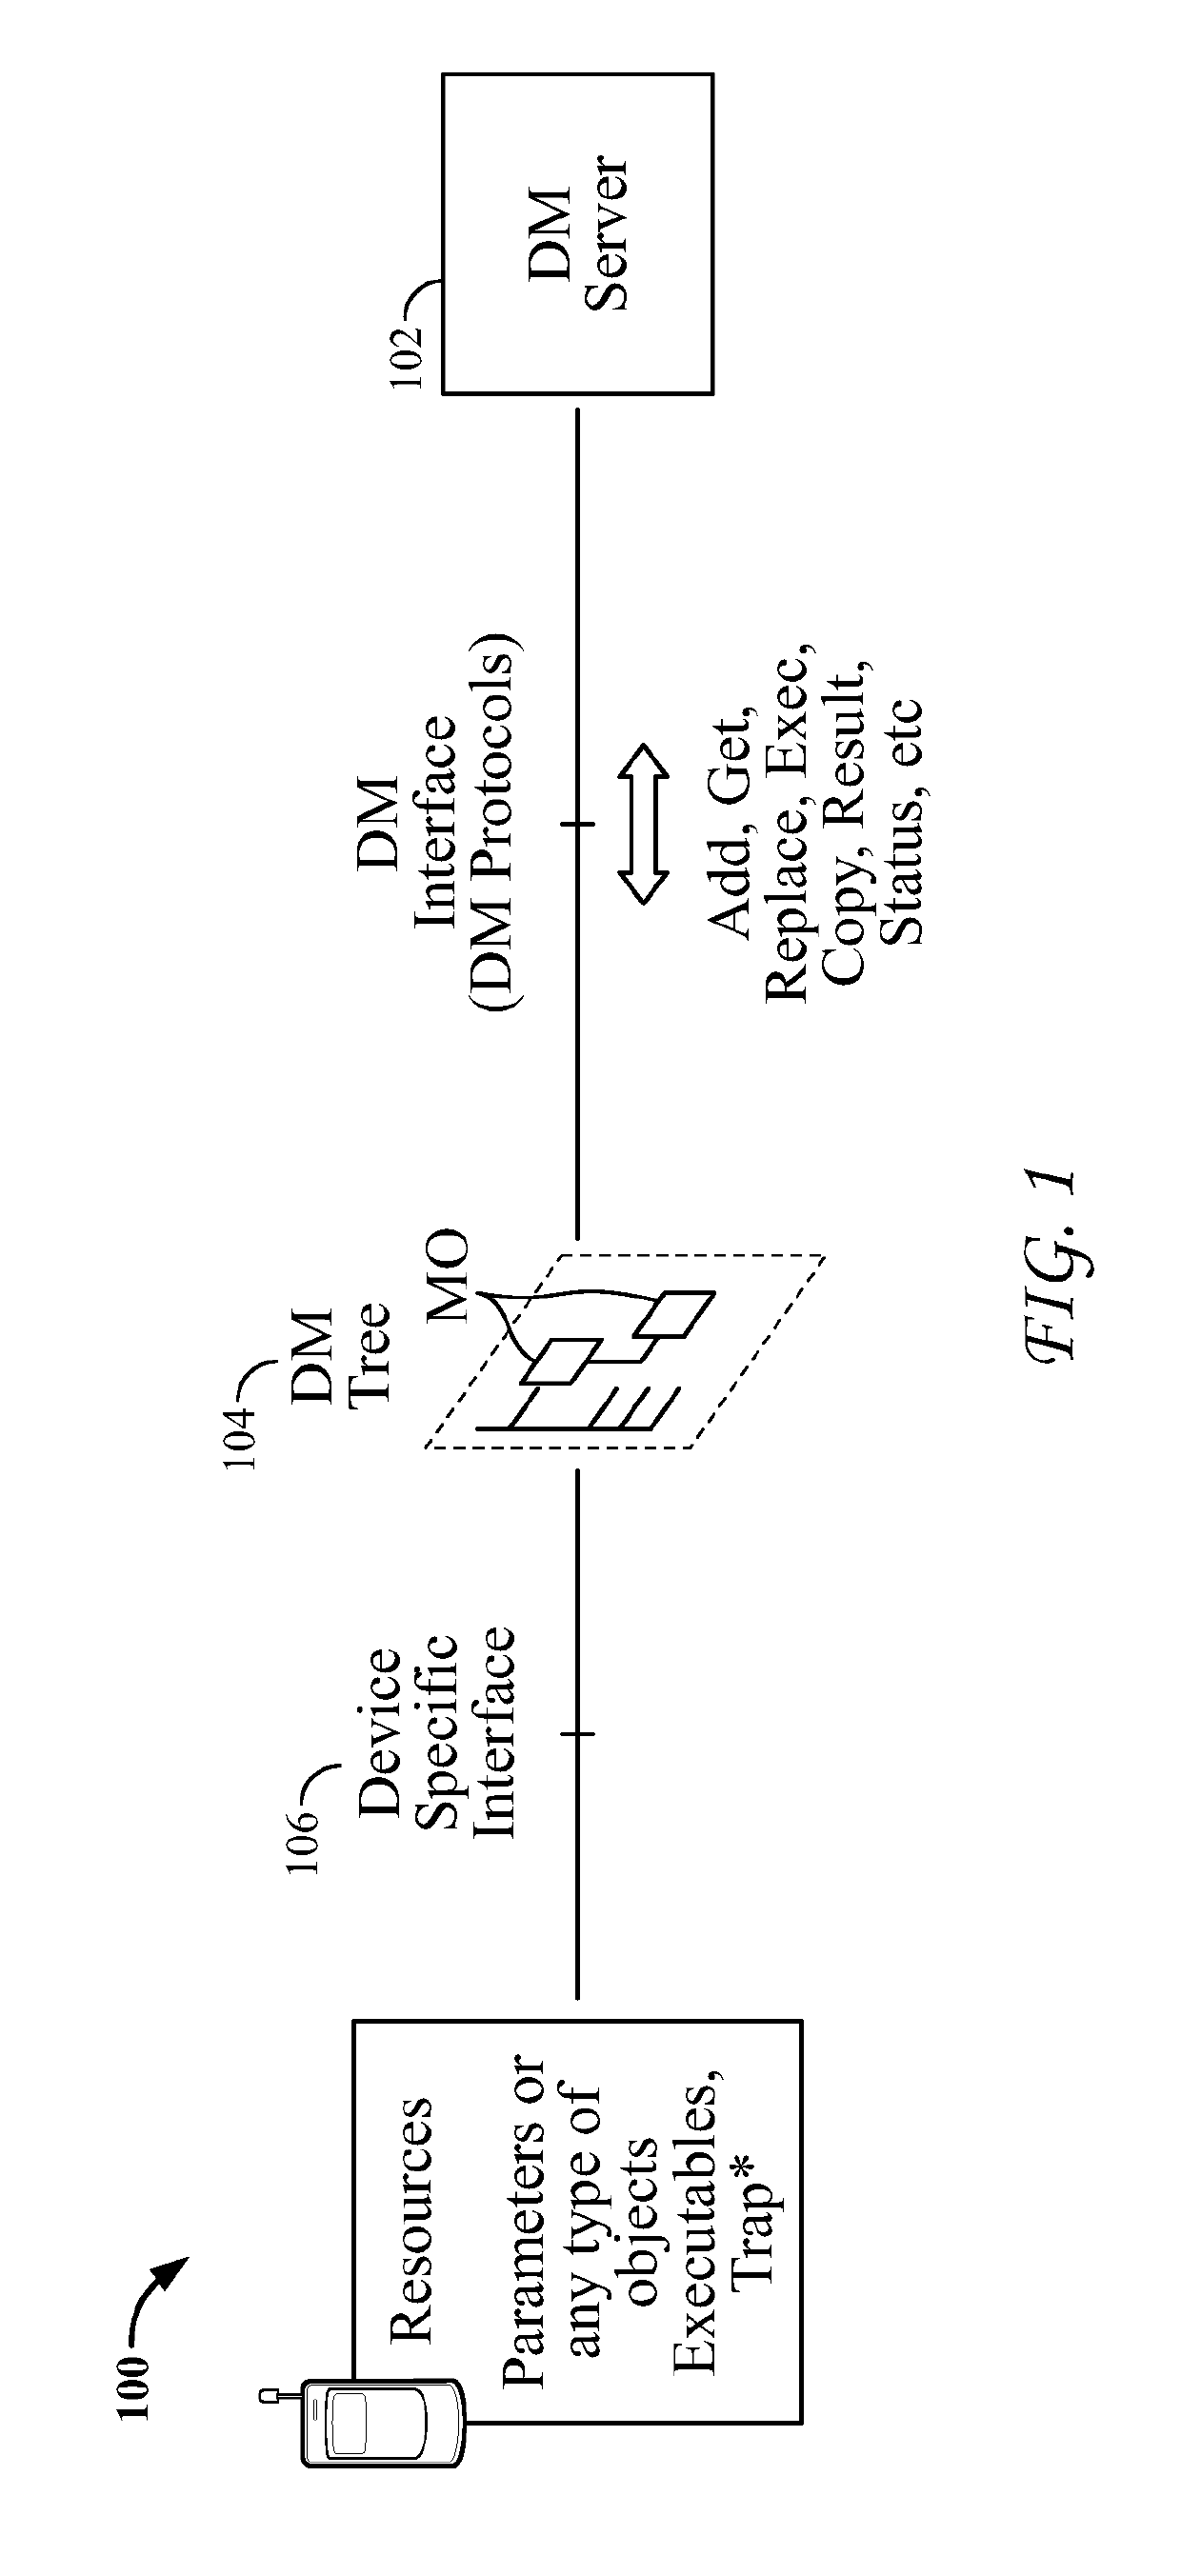 Methods and apparatus for enhancing native service layer device management functionality